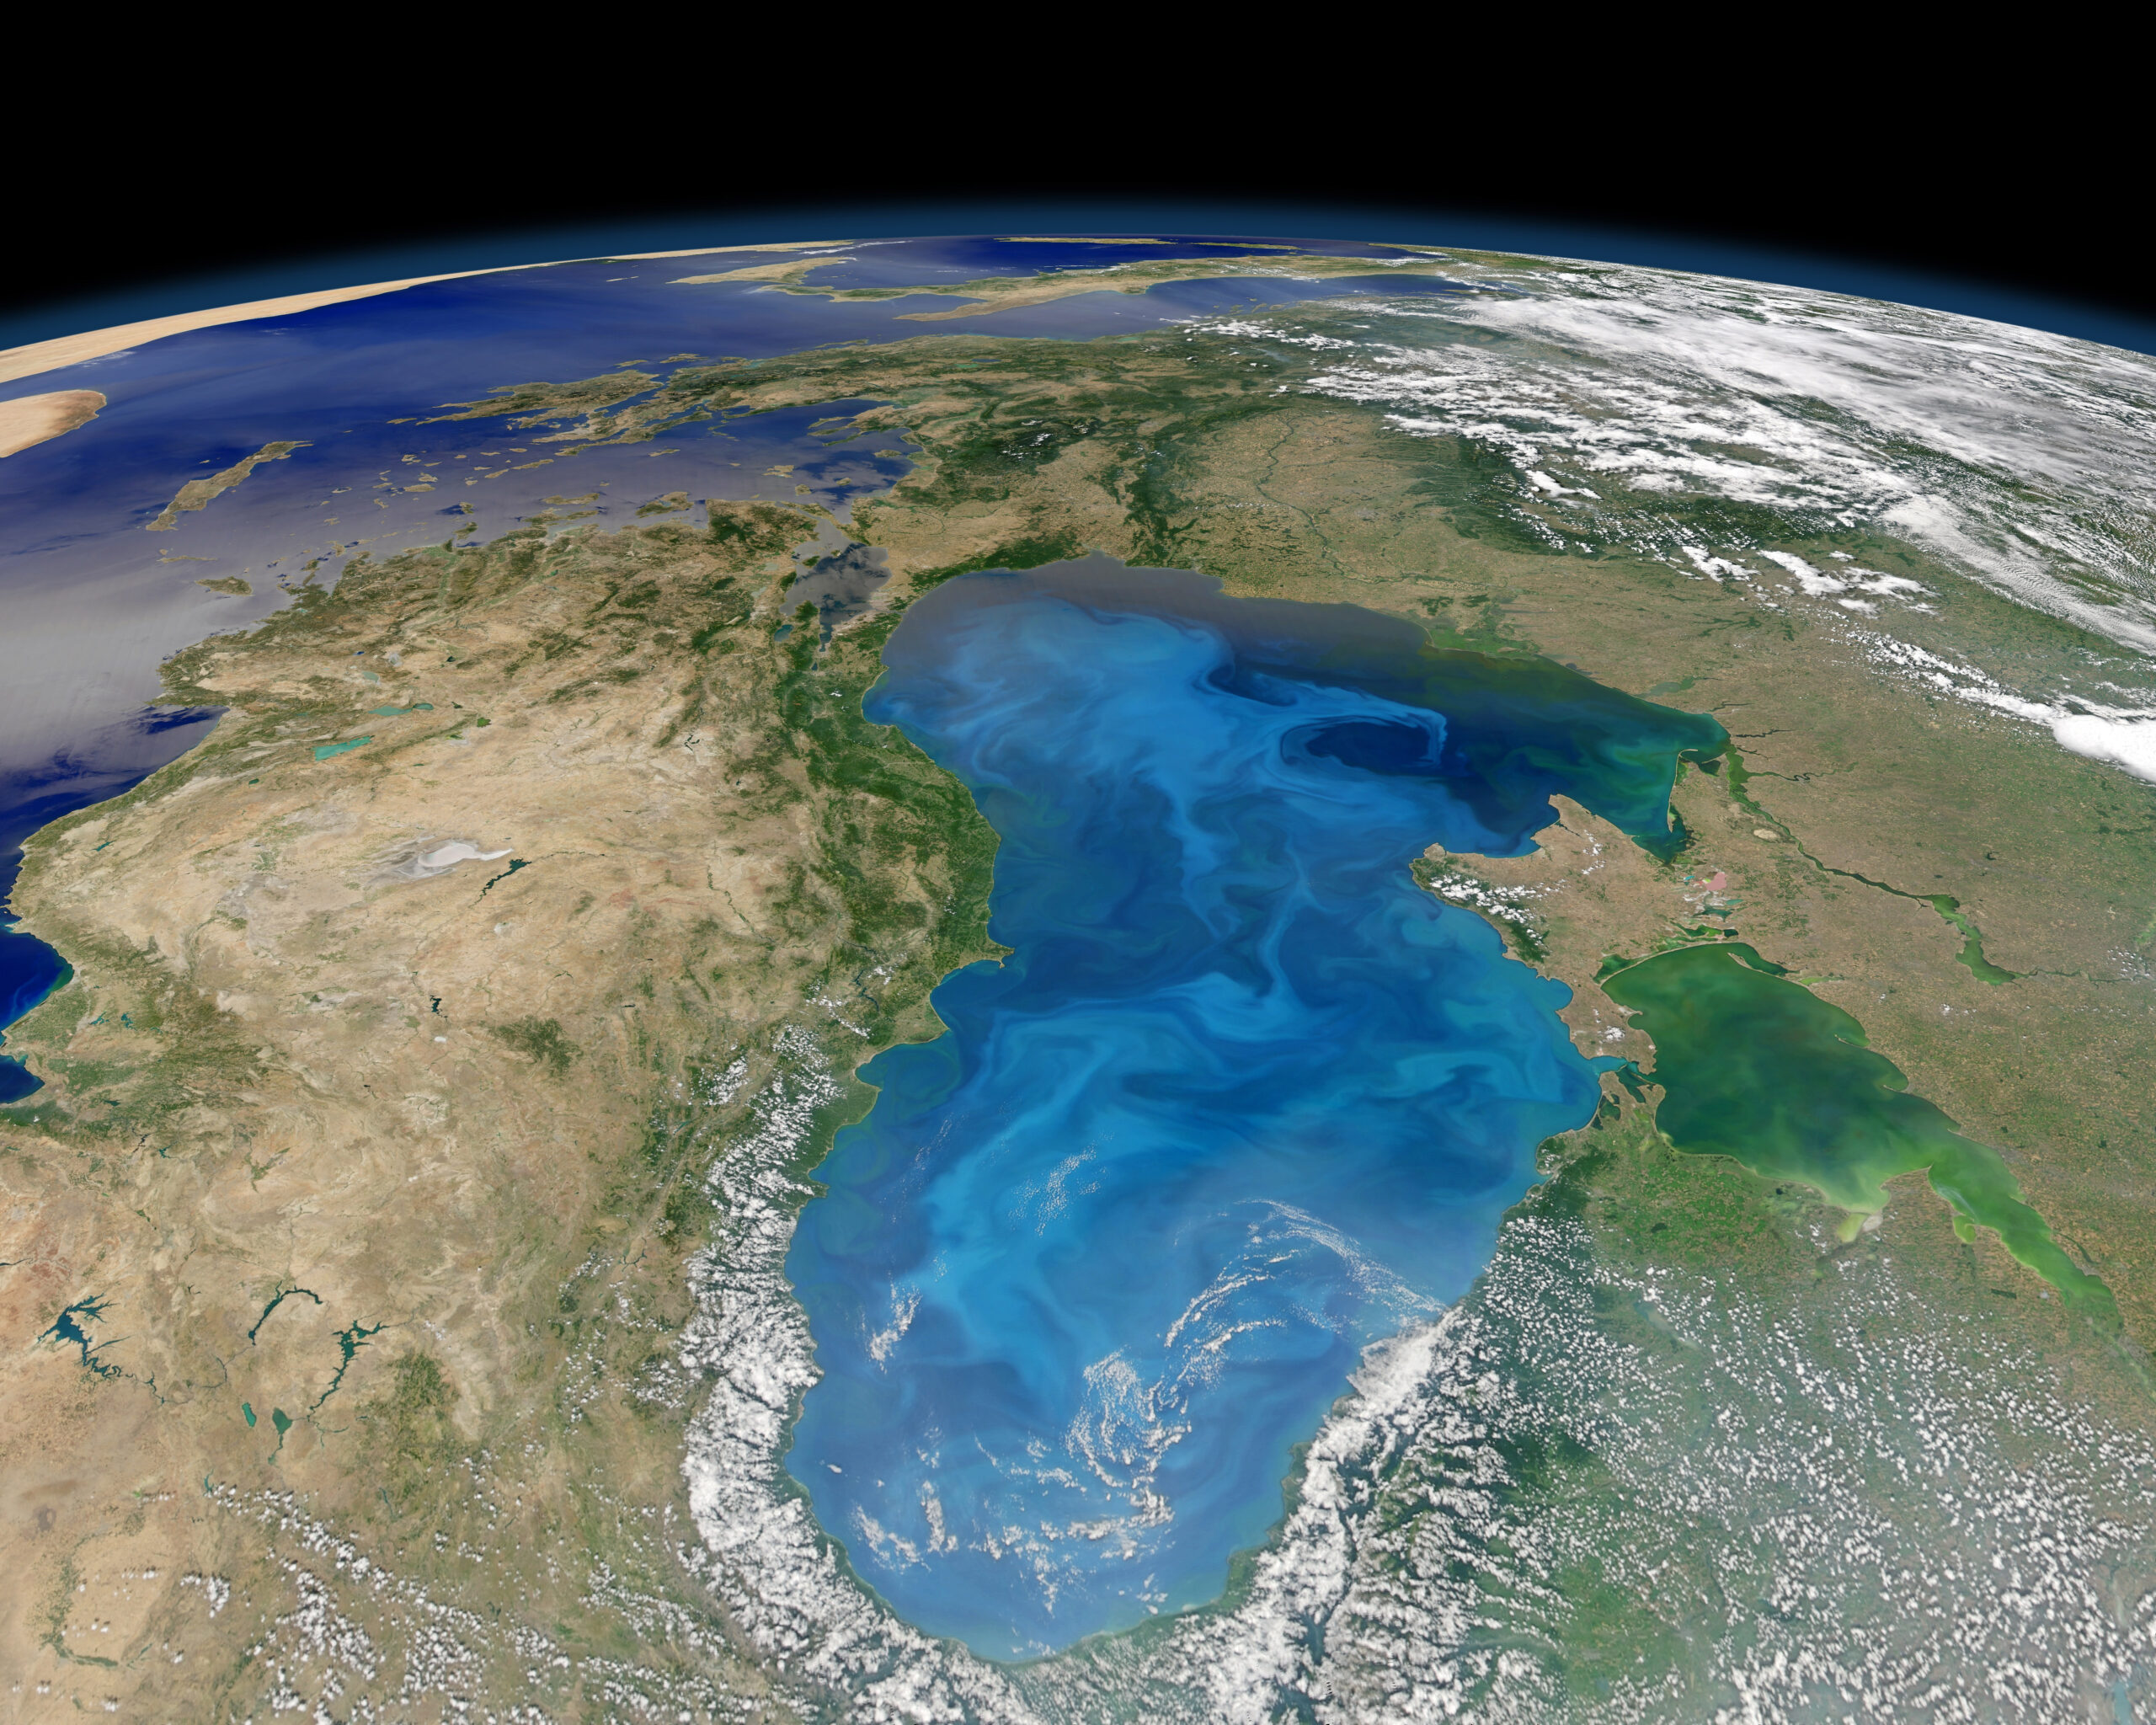 Image Taken From Space of Black Sea Region, Krasnodar and Environs, adapted from image at nasa.gov